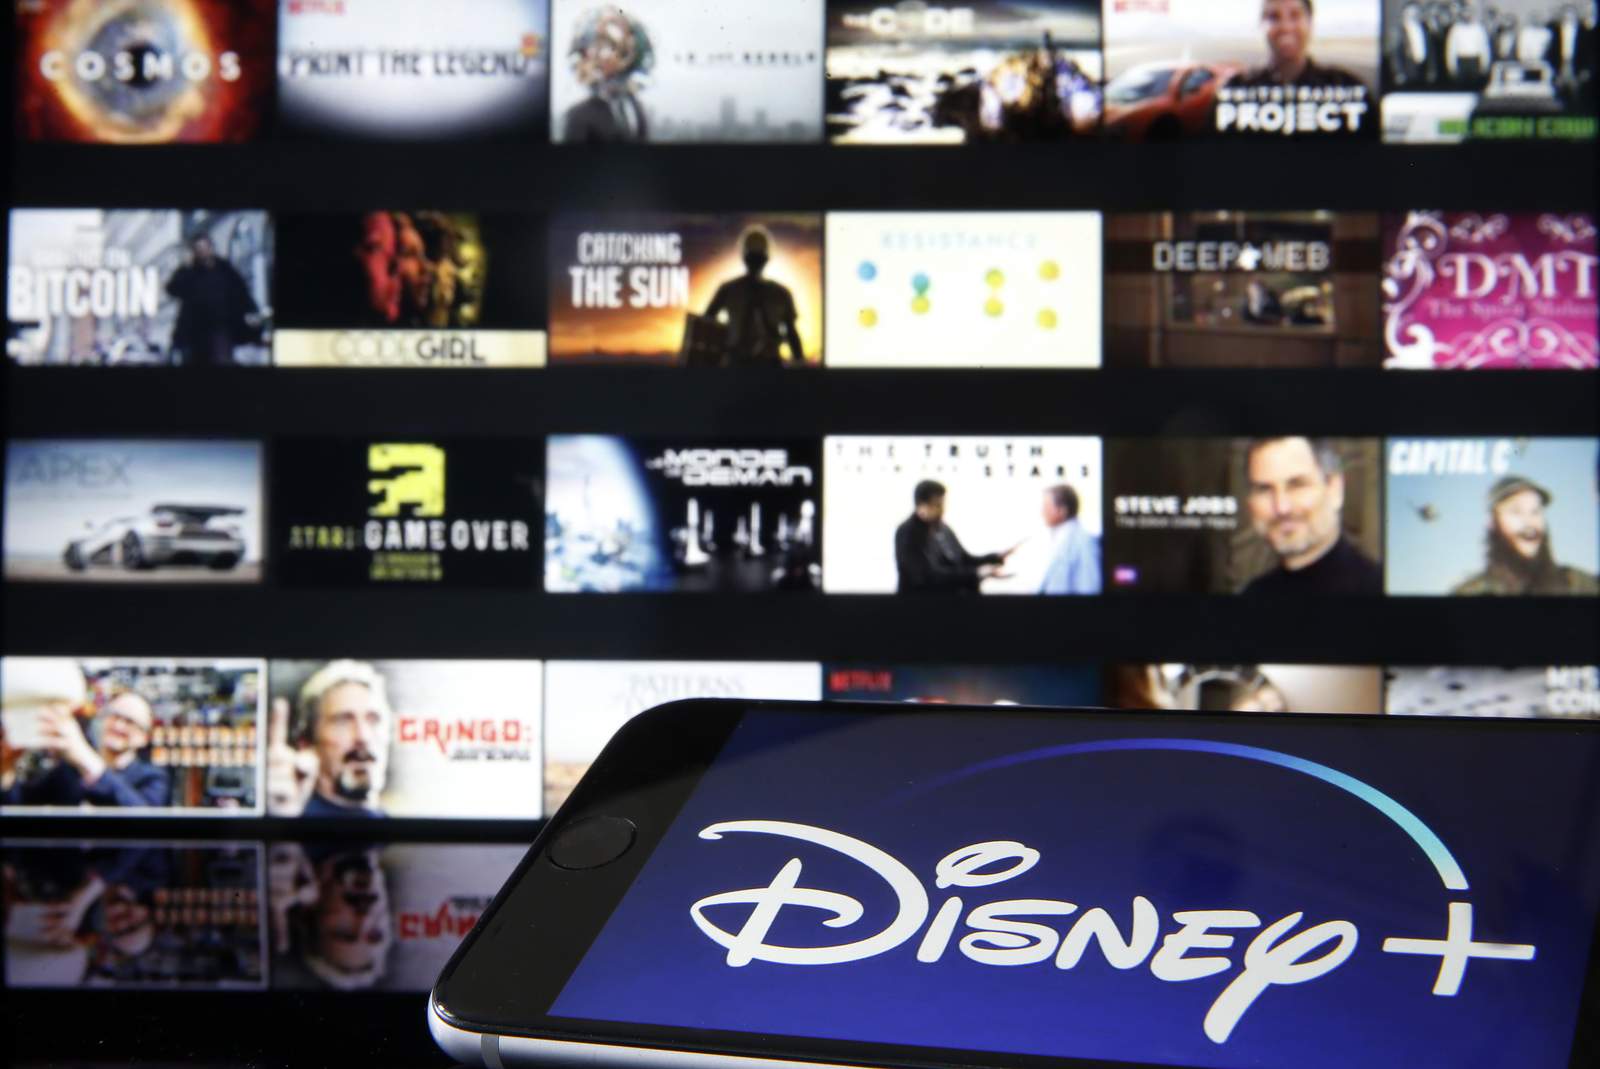 Social distancing? A website will pay you to watch your favorite Disney movie